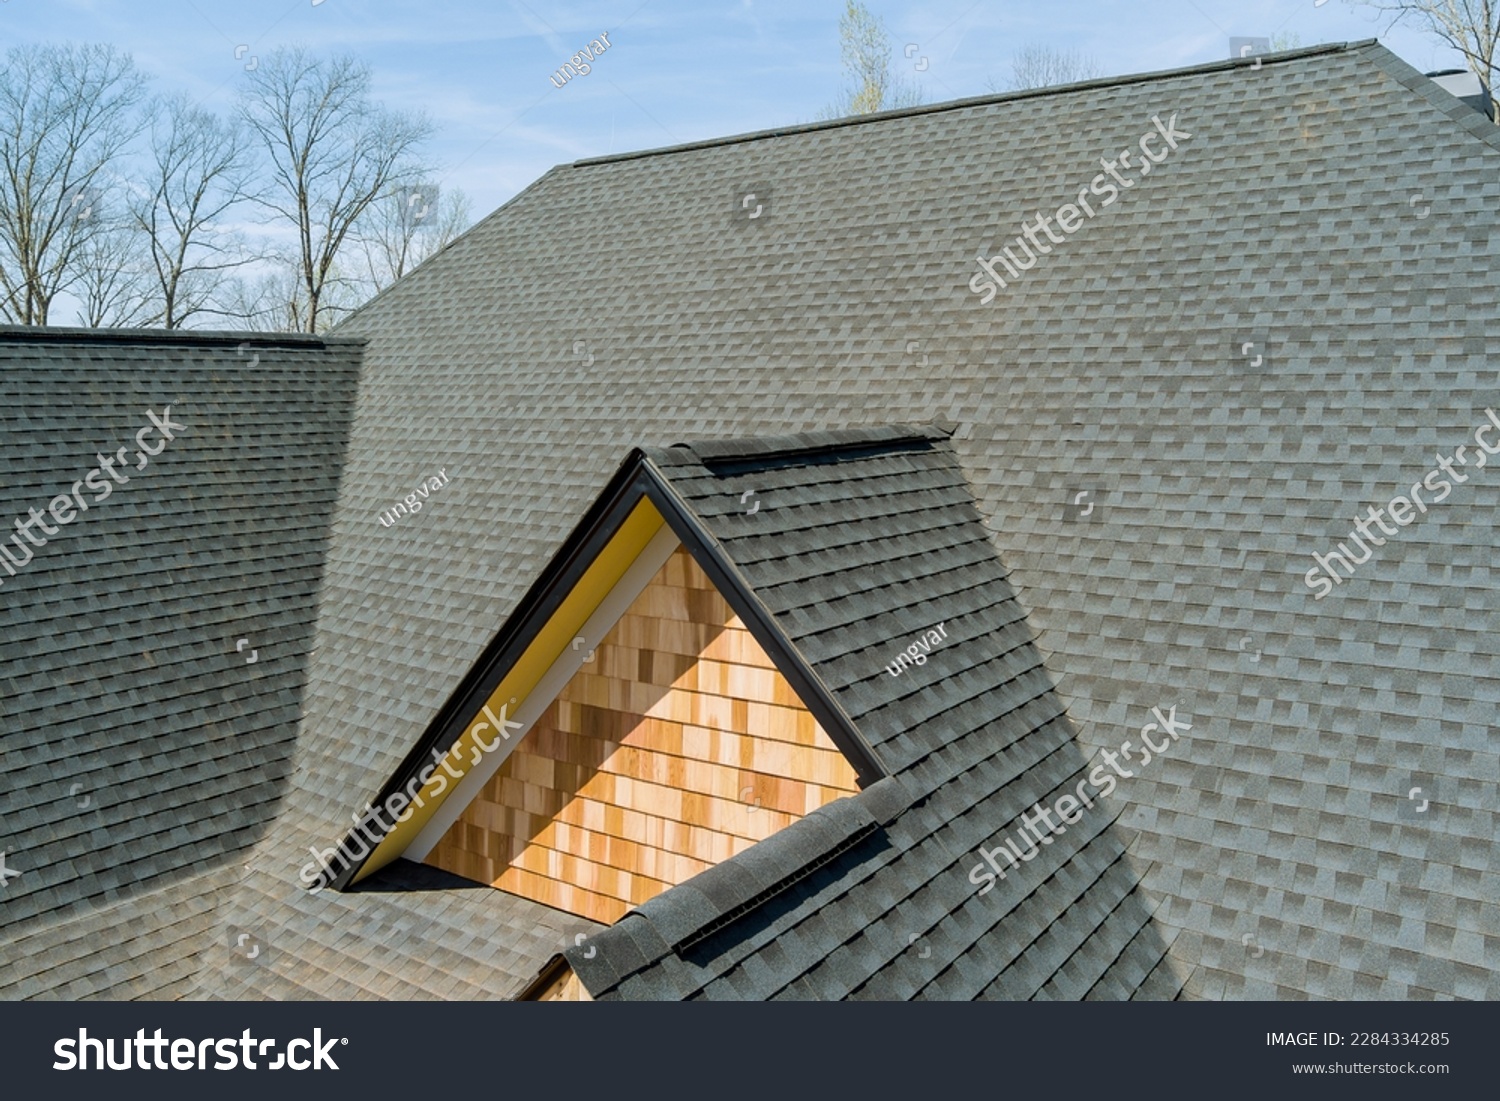 When installing top covering of asphalt shingles on new house quality roof work is inspected #2284334285